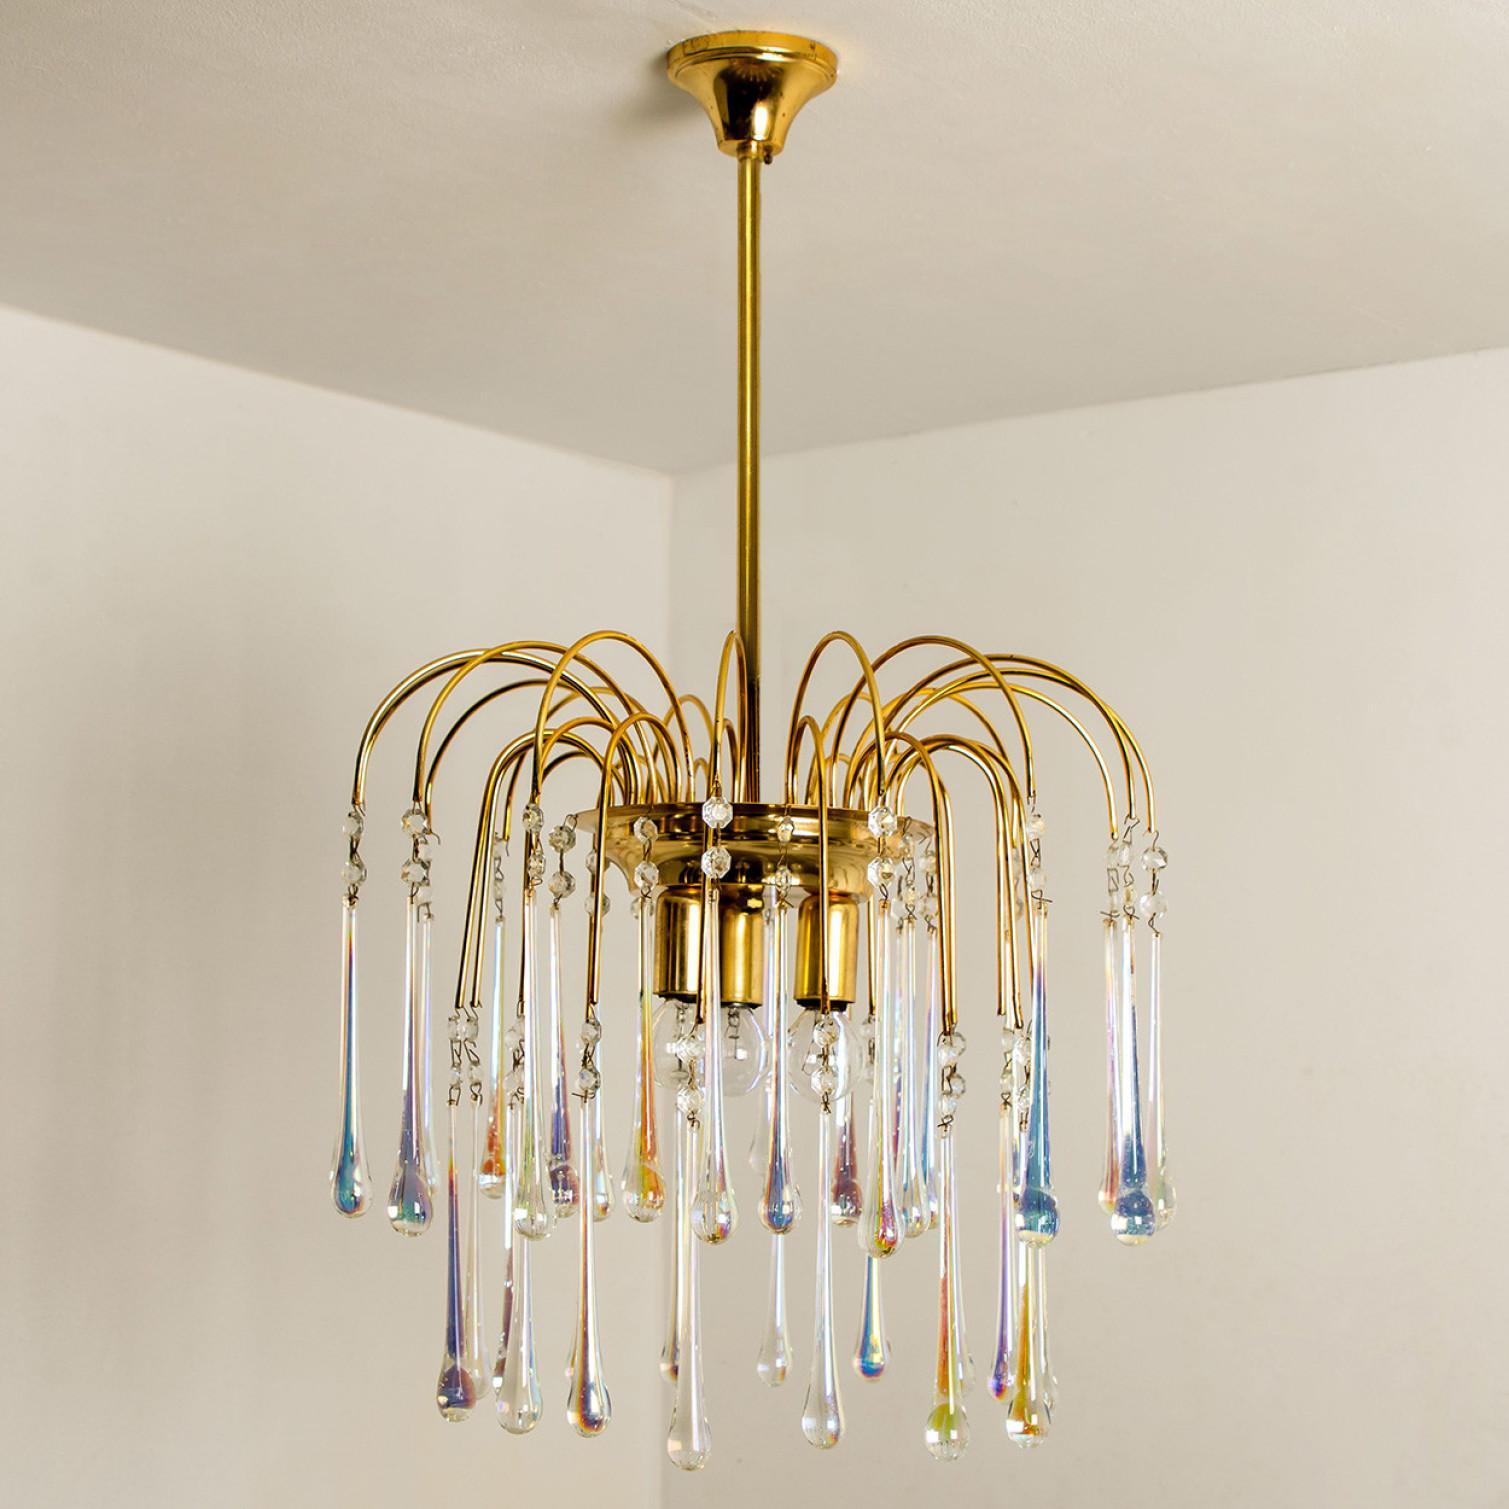 Beautiful teardrop chandelier, made of Murano glass crystals, Italy, 1950s. The chandelier has a brass frame with teardrop like crystals attached to it.

 The chandelier is adjustable in height via extending or shortening the chain.